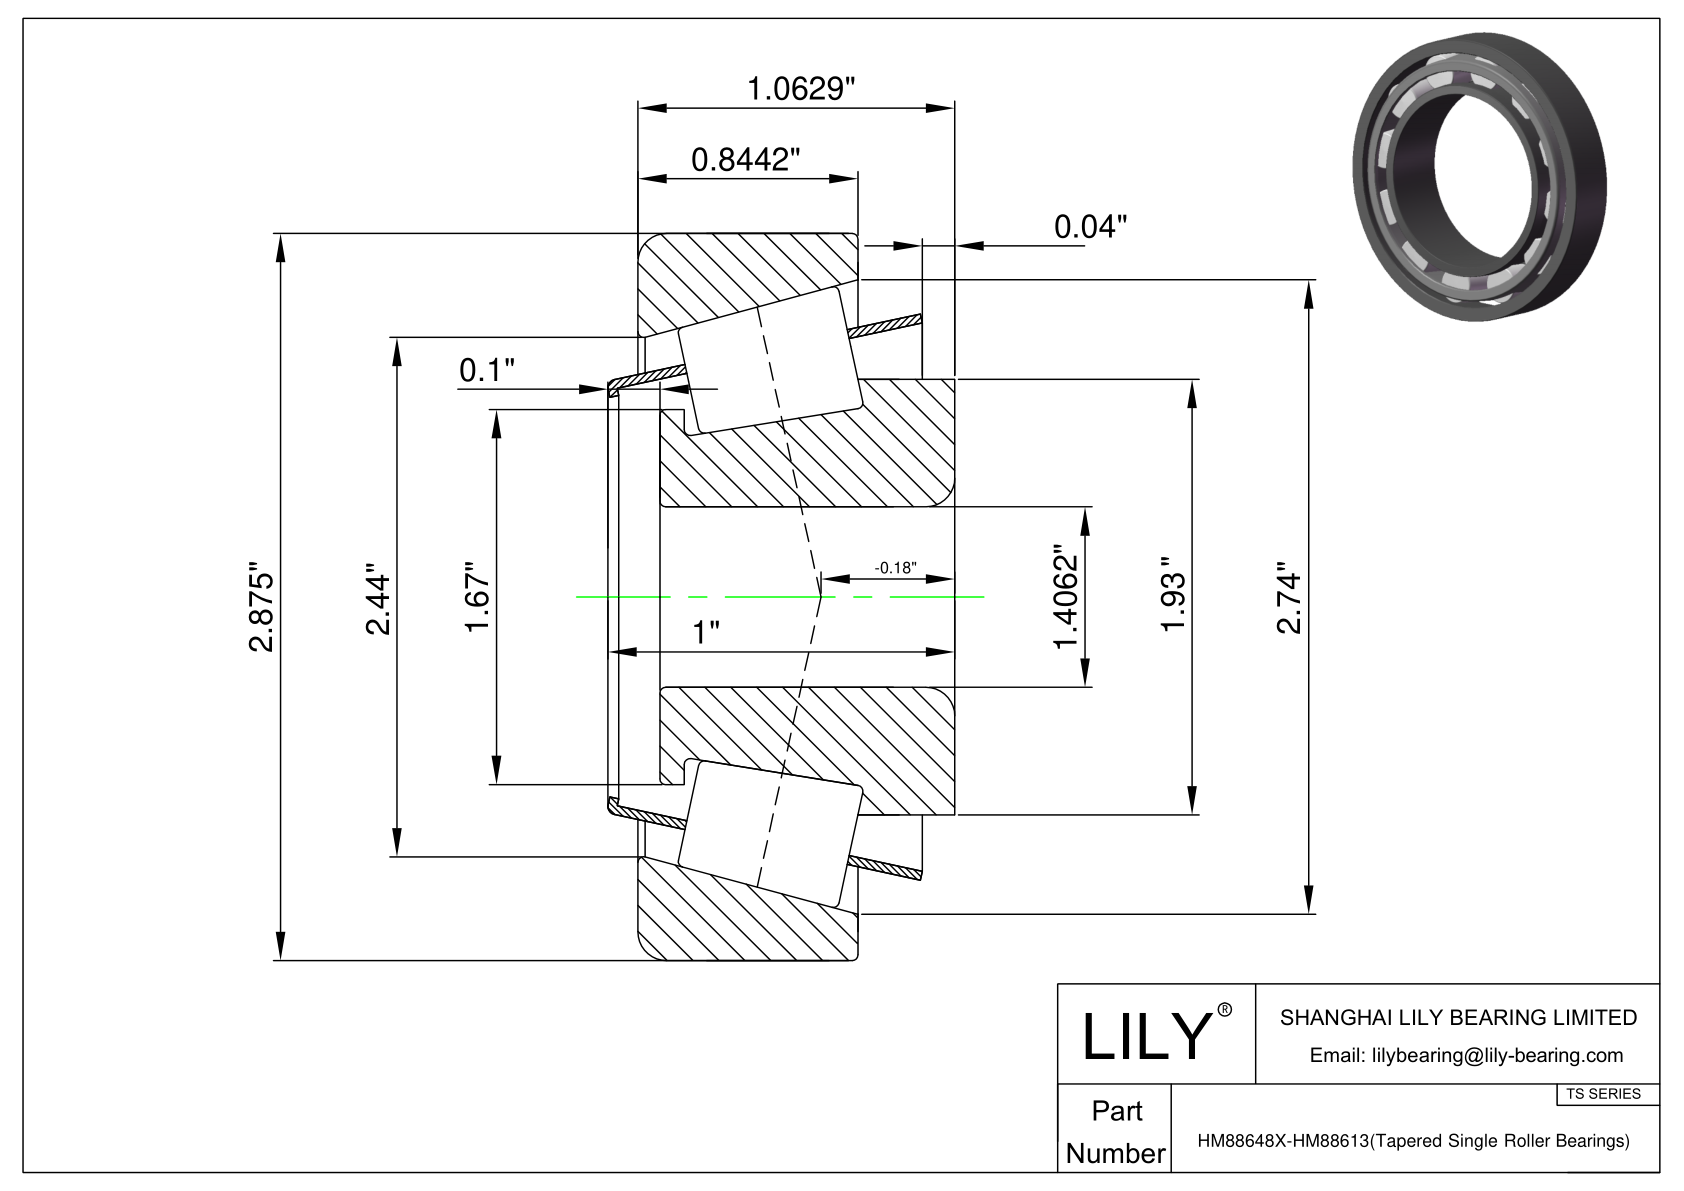 HM88648X-HM88613 TS (Tapered Single Roller Bearings) (Imperial) cad drawing